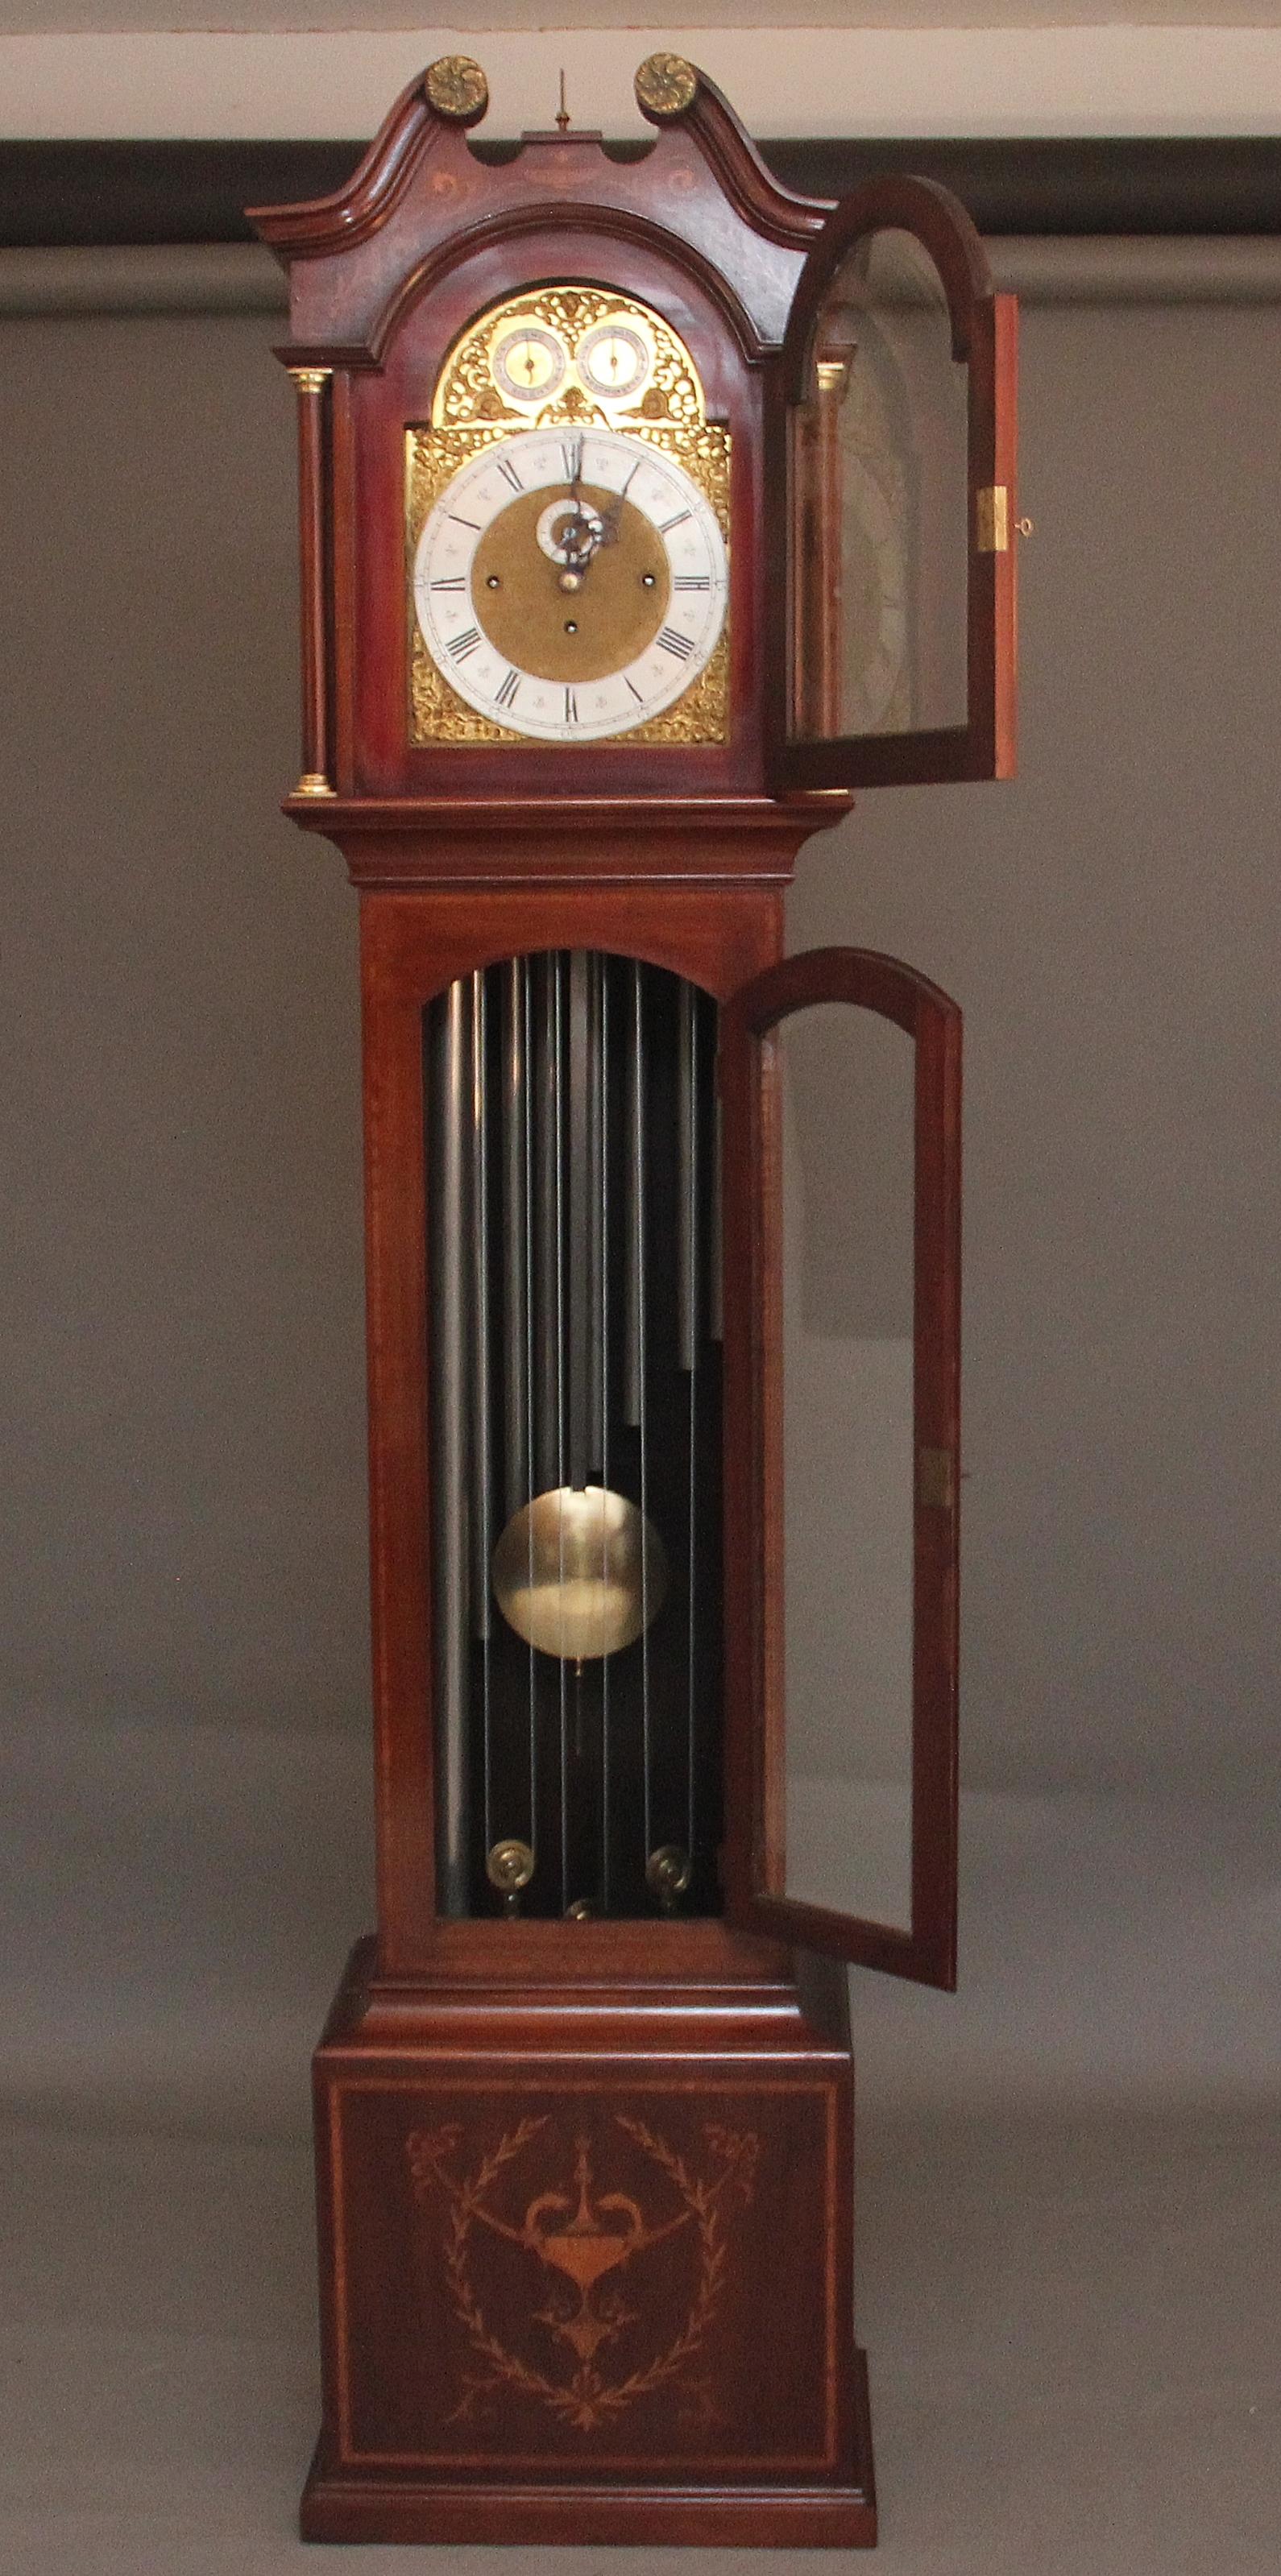 A lovely quality Edwardian inlaid mahogany musical tubular chiming longcase clock, having an eight day movement chiming on nine graduated tubular gongs, the arched dial can be set to silent or the option of two musical chimes, Whittington or